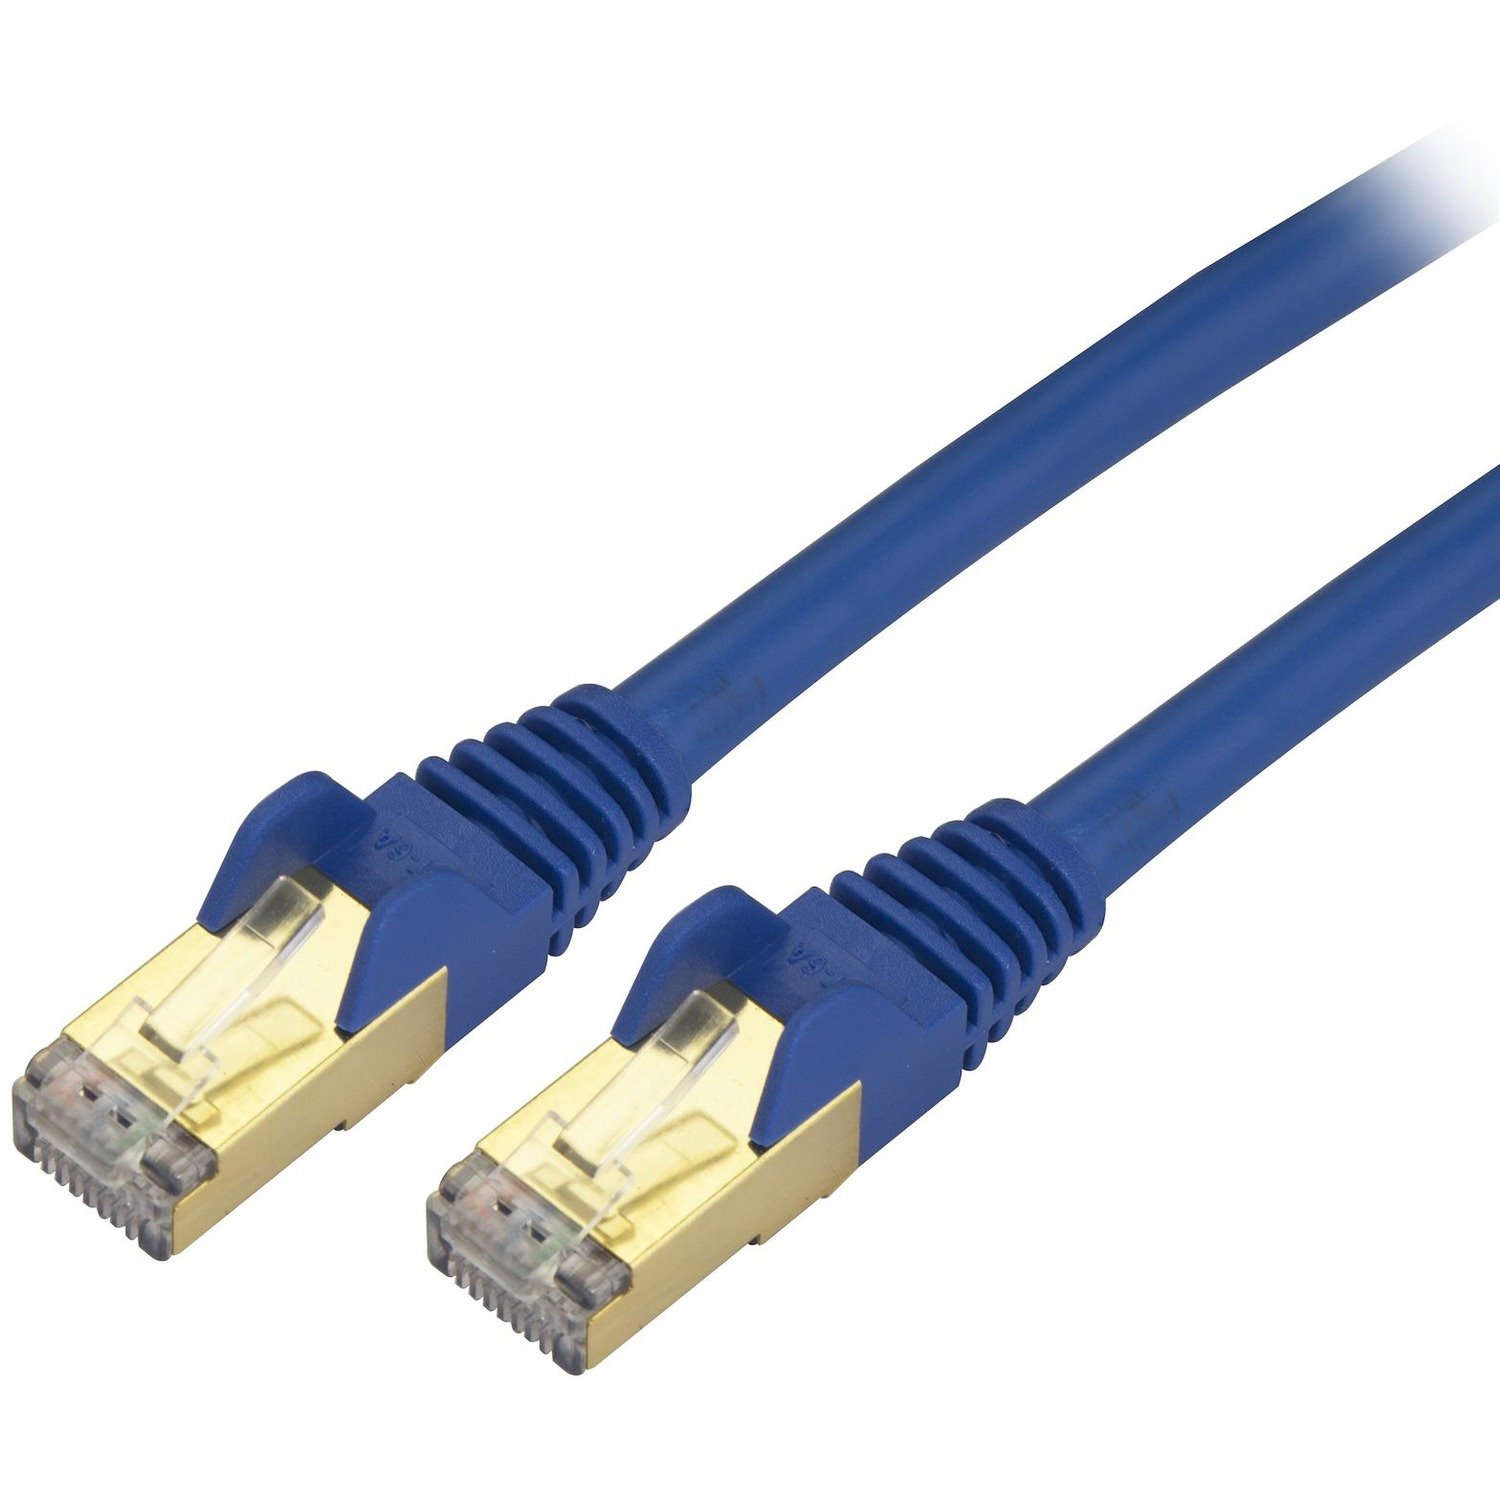 StarTech.com 1ft CAT6a Ethernet Cable - 10 Gigabit Category 6a Shielded Snagless 100W PoE Patch Cord - 10GbE Blue UL Certified Wiring/TIA